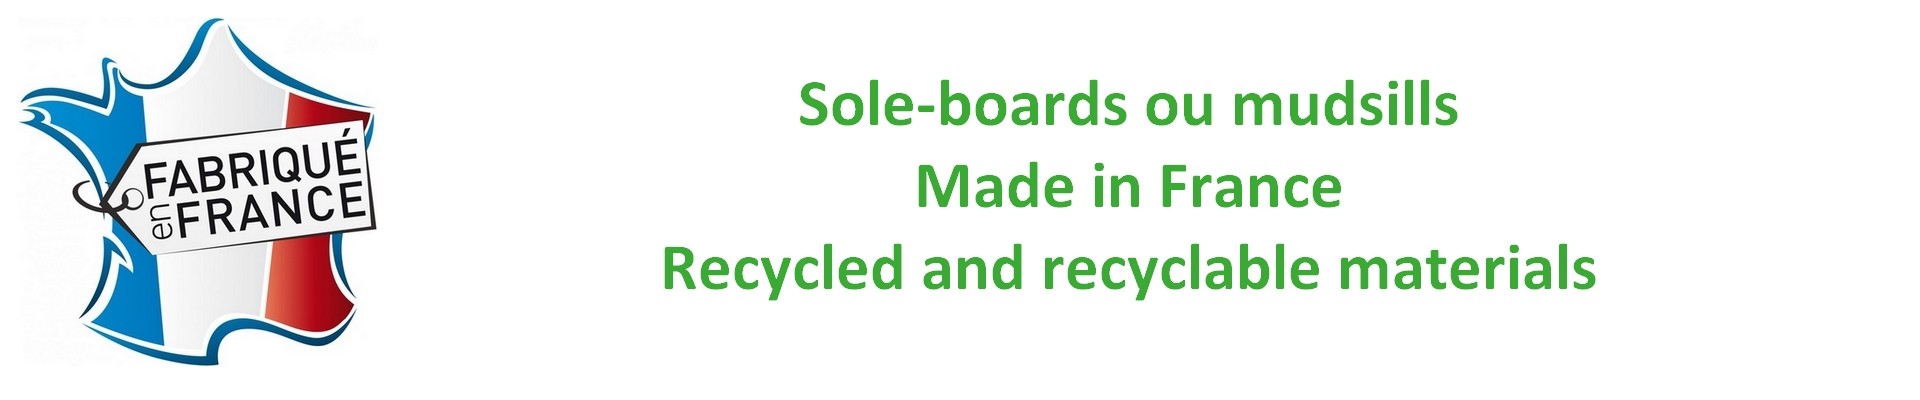 Sole-boards or mudsill, made in France, Recycled and recyclable plastics